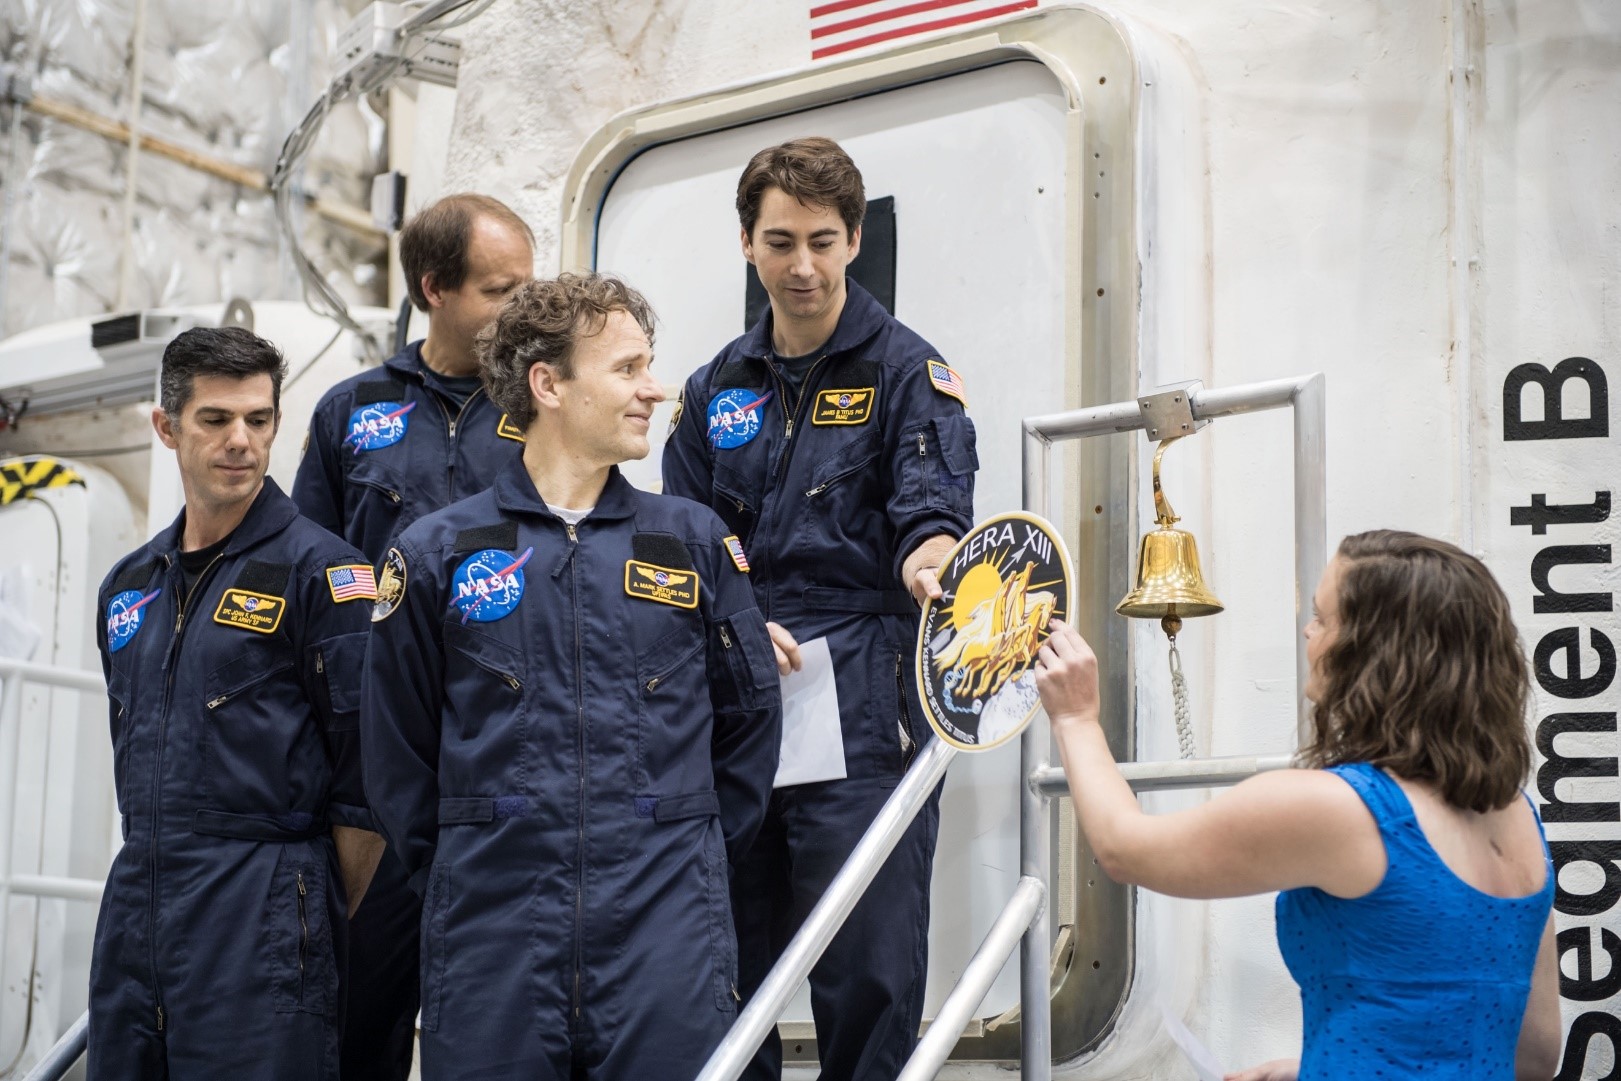 Moments after turning the vessel back over to NASA after 45-days inside, the HERA XIII crew is given their mission patch to plac